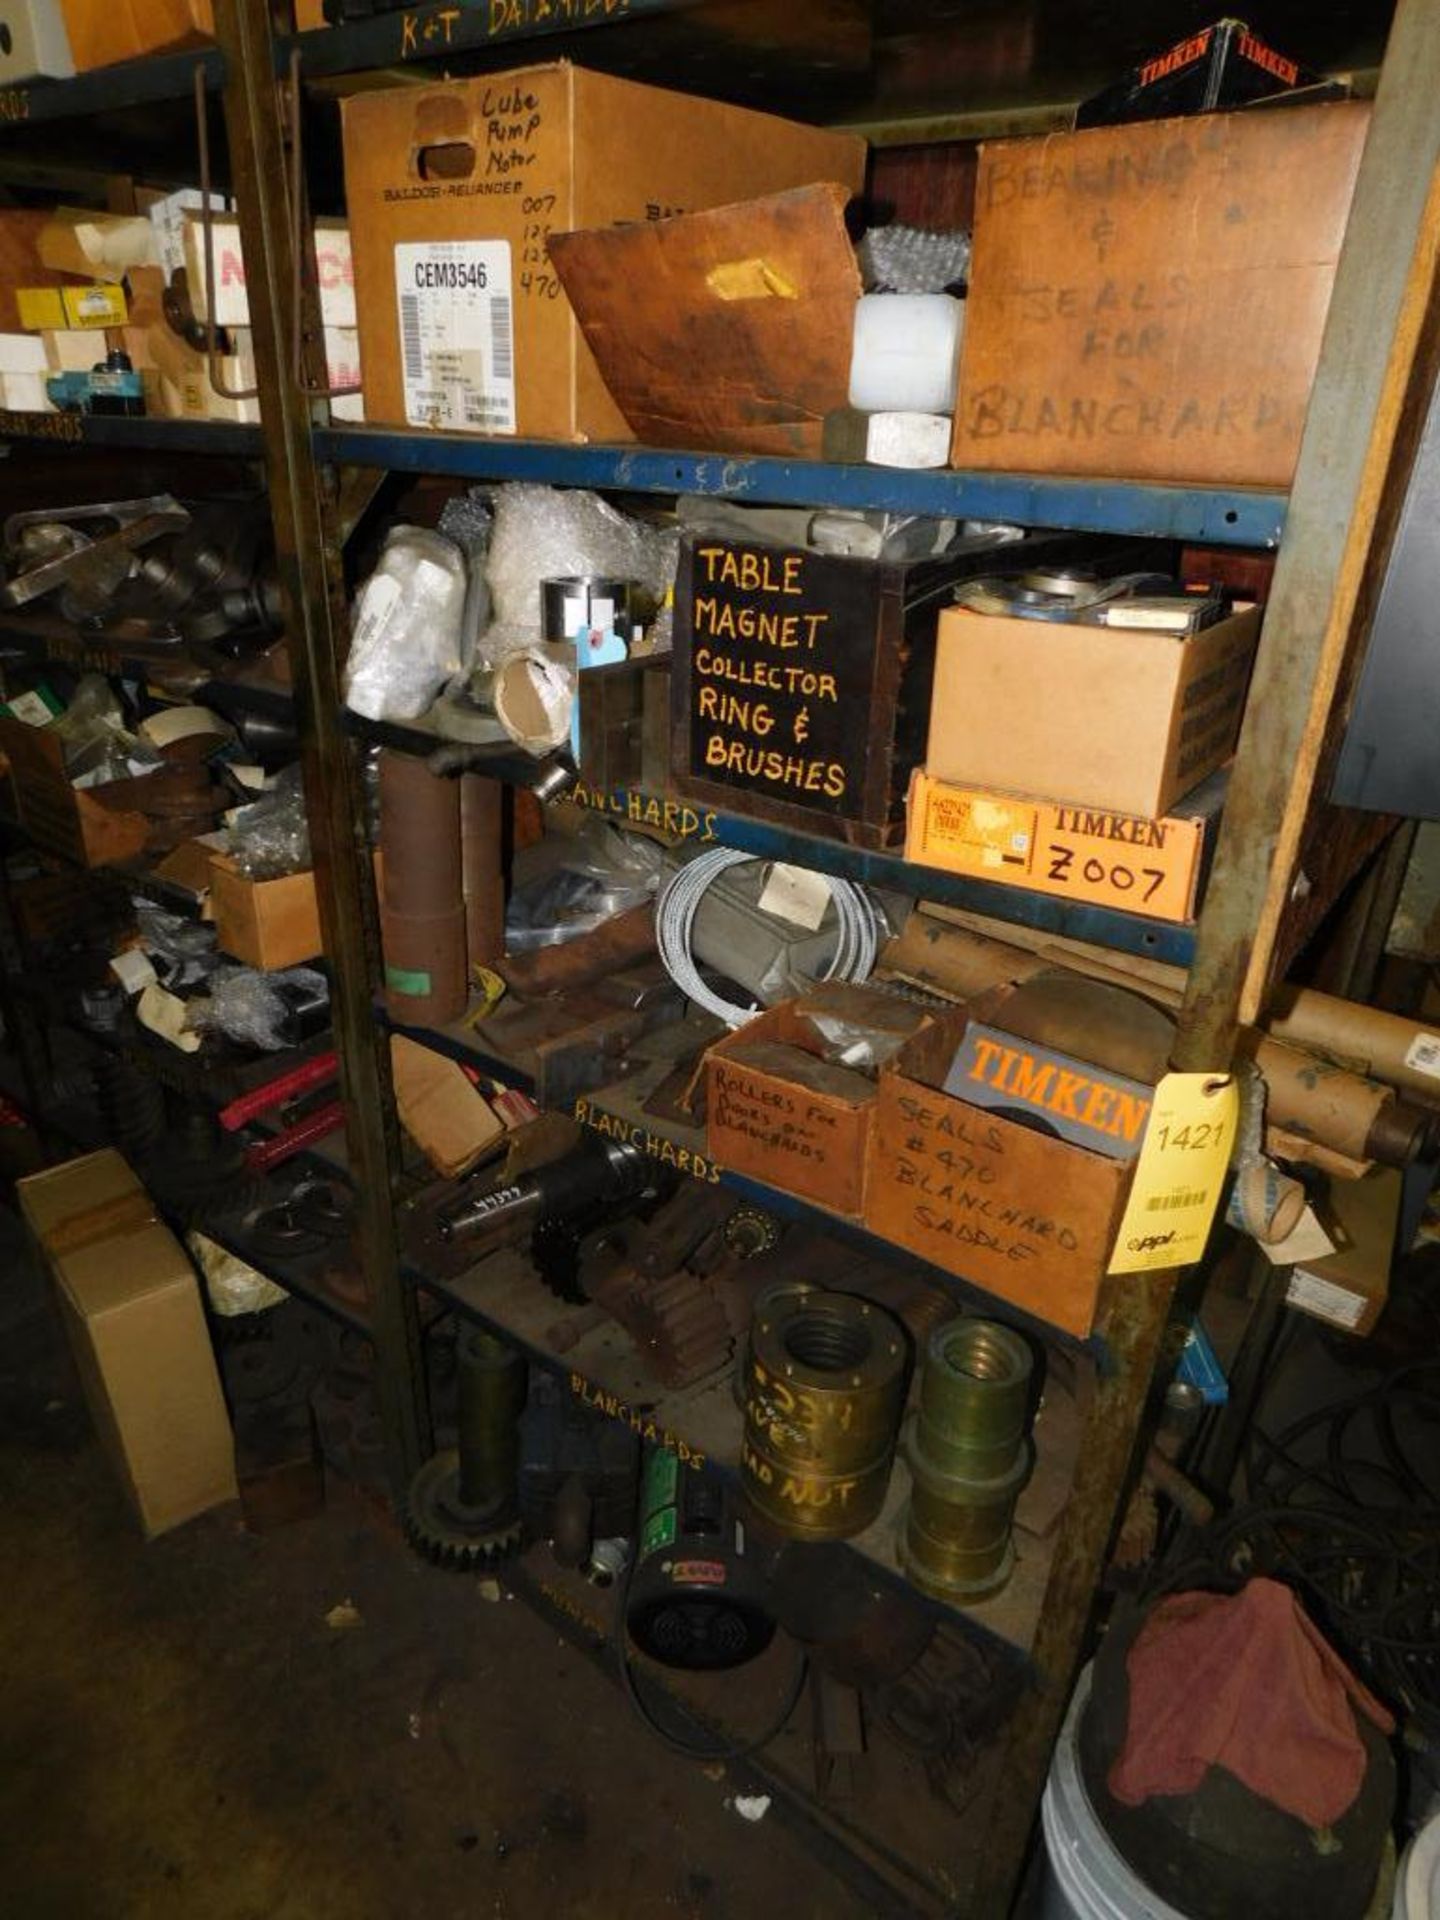 LOT: Contents of Back Maintenance Room: (2) Racks of Contents, Machine Parts, Hosing, Wire, Parts Wa - Image 2 of 16